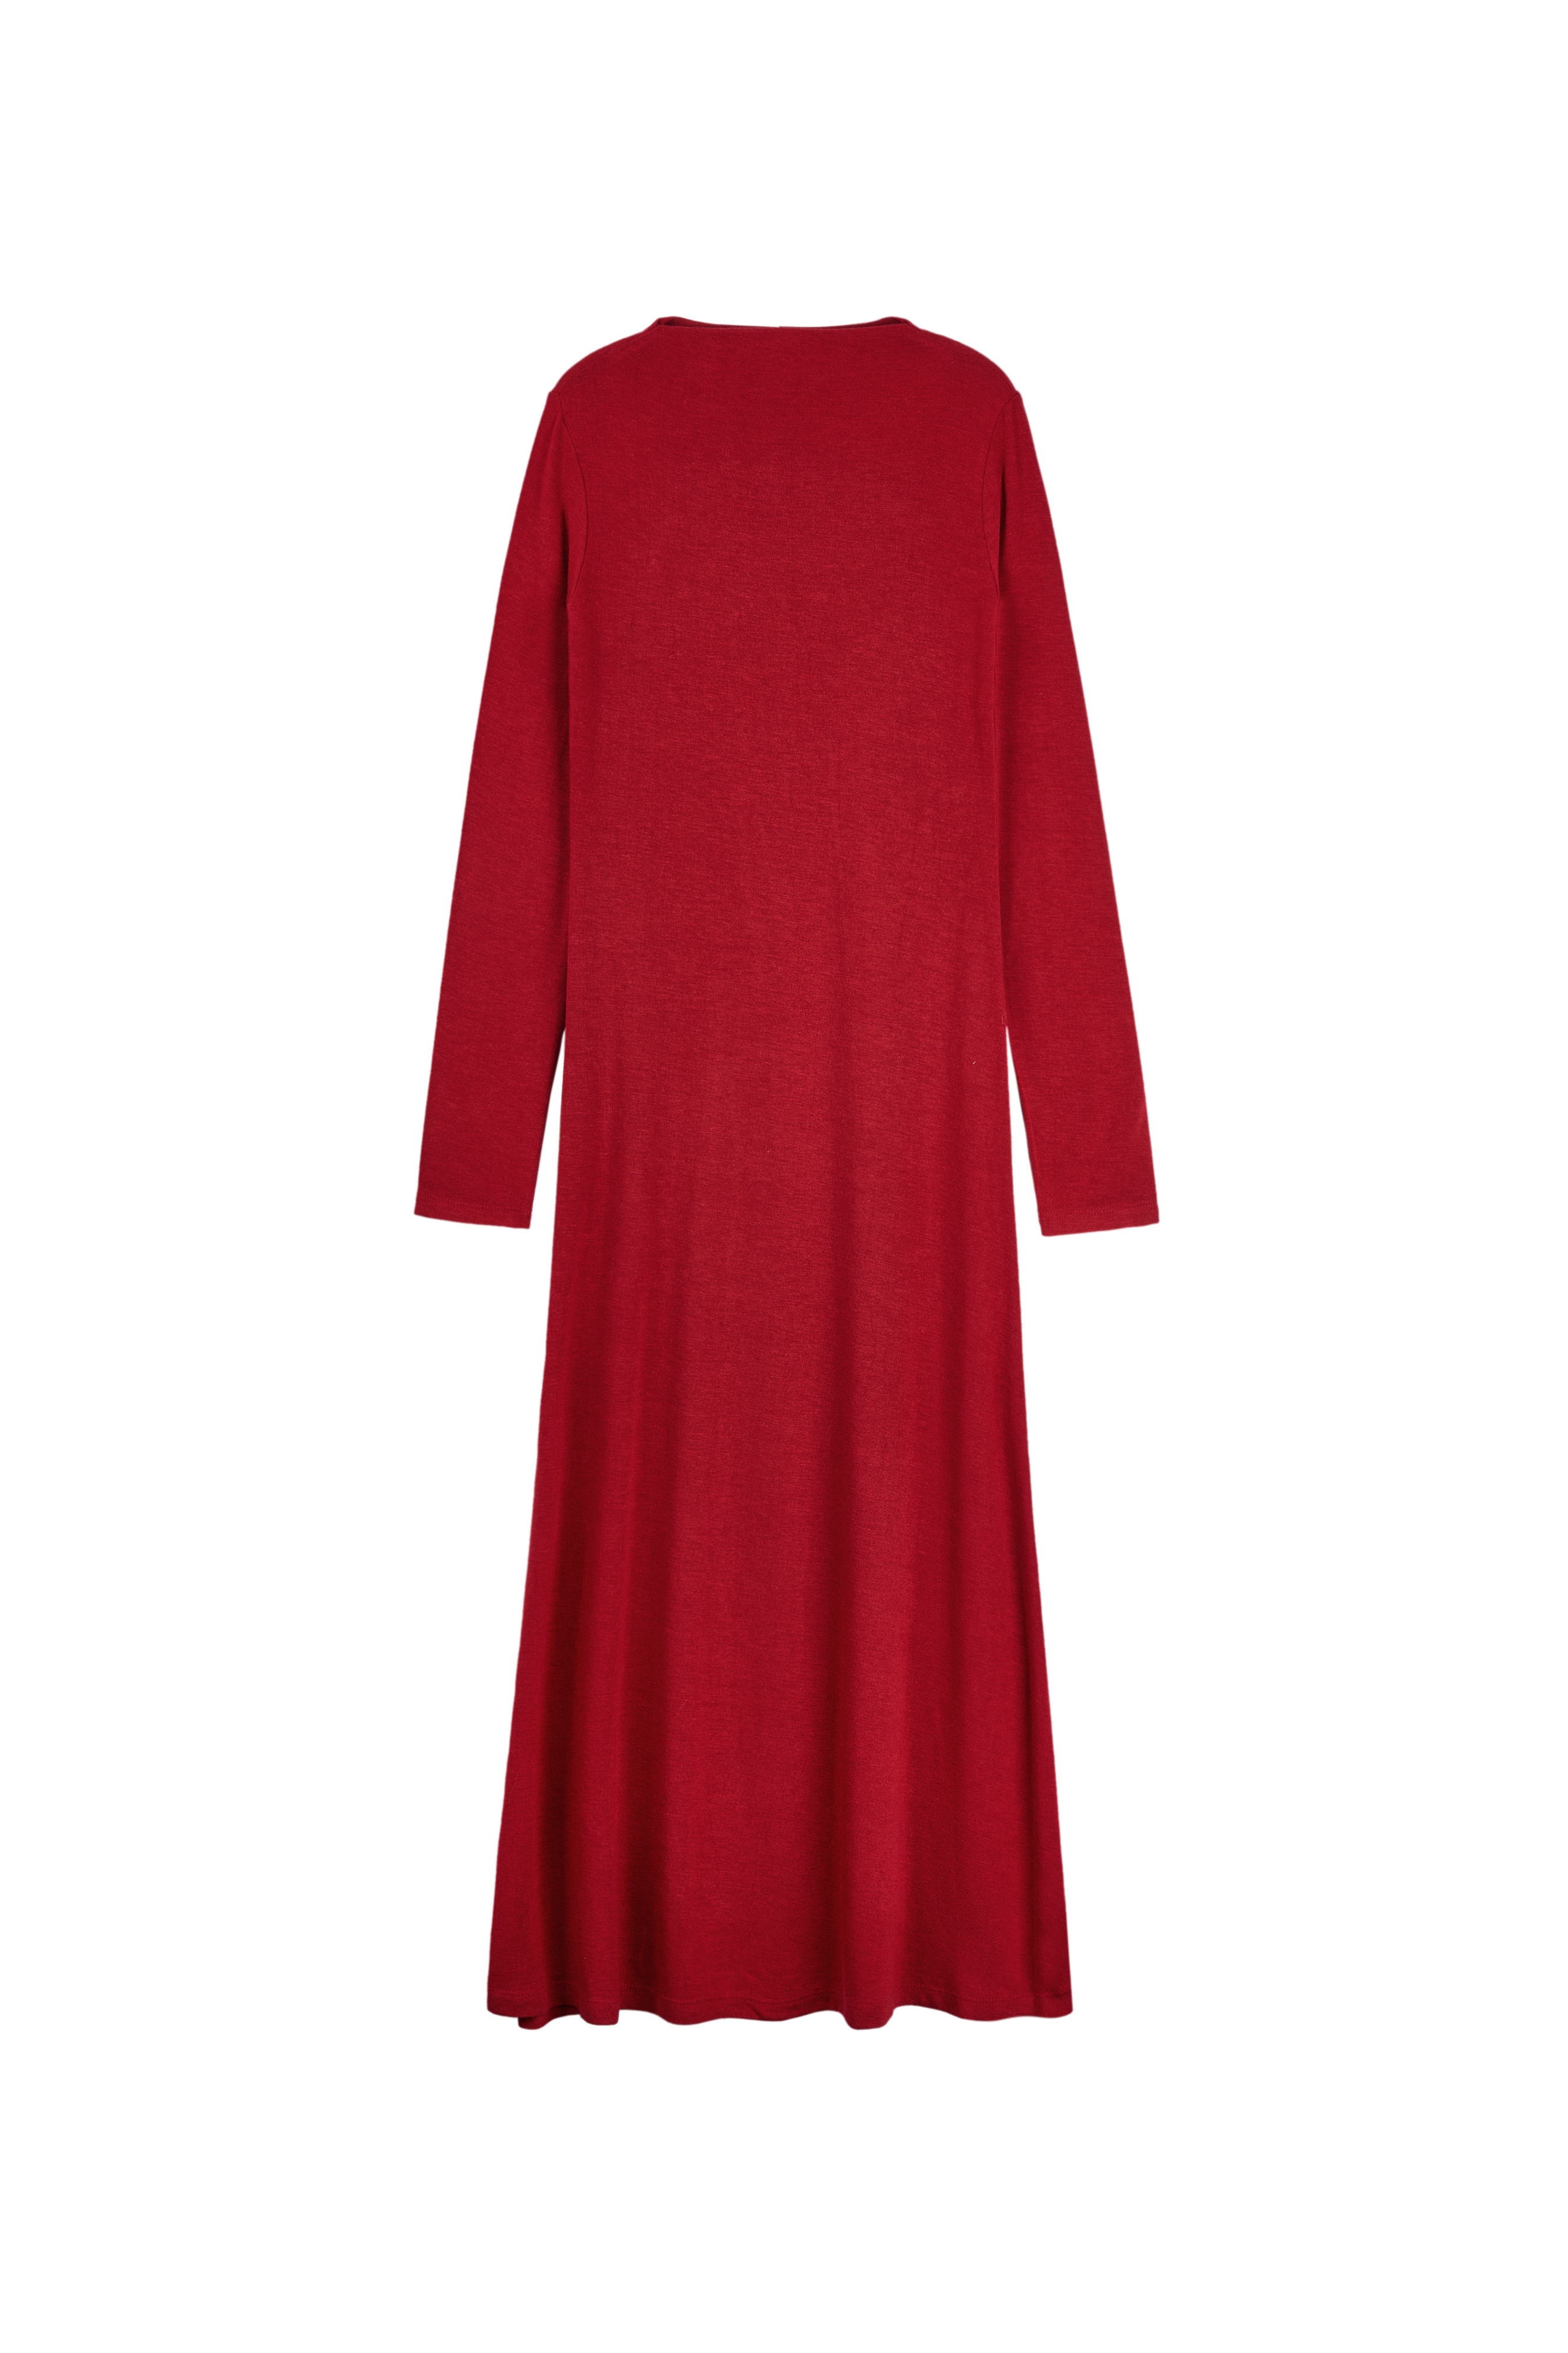 WINTER HOLIDAY DRESS (RED)